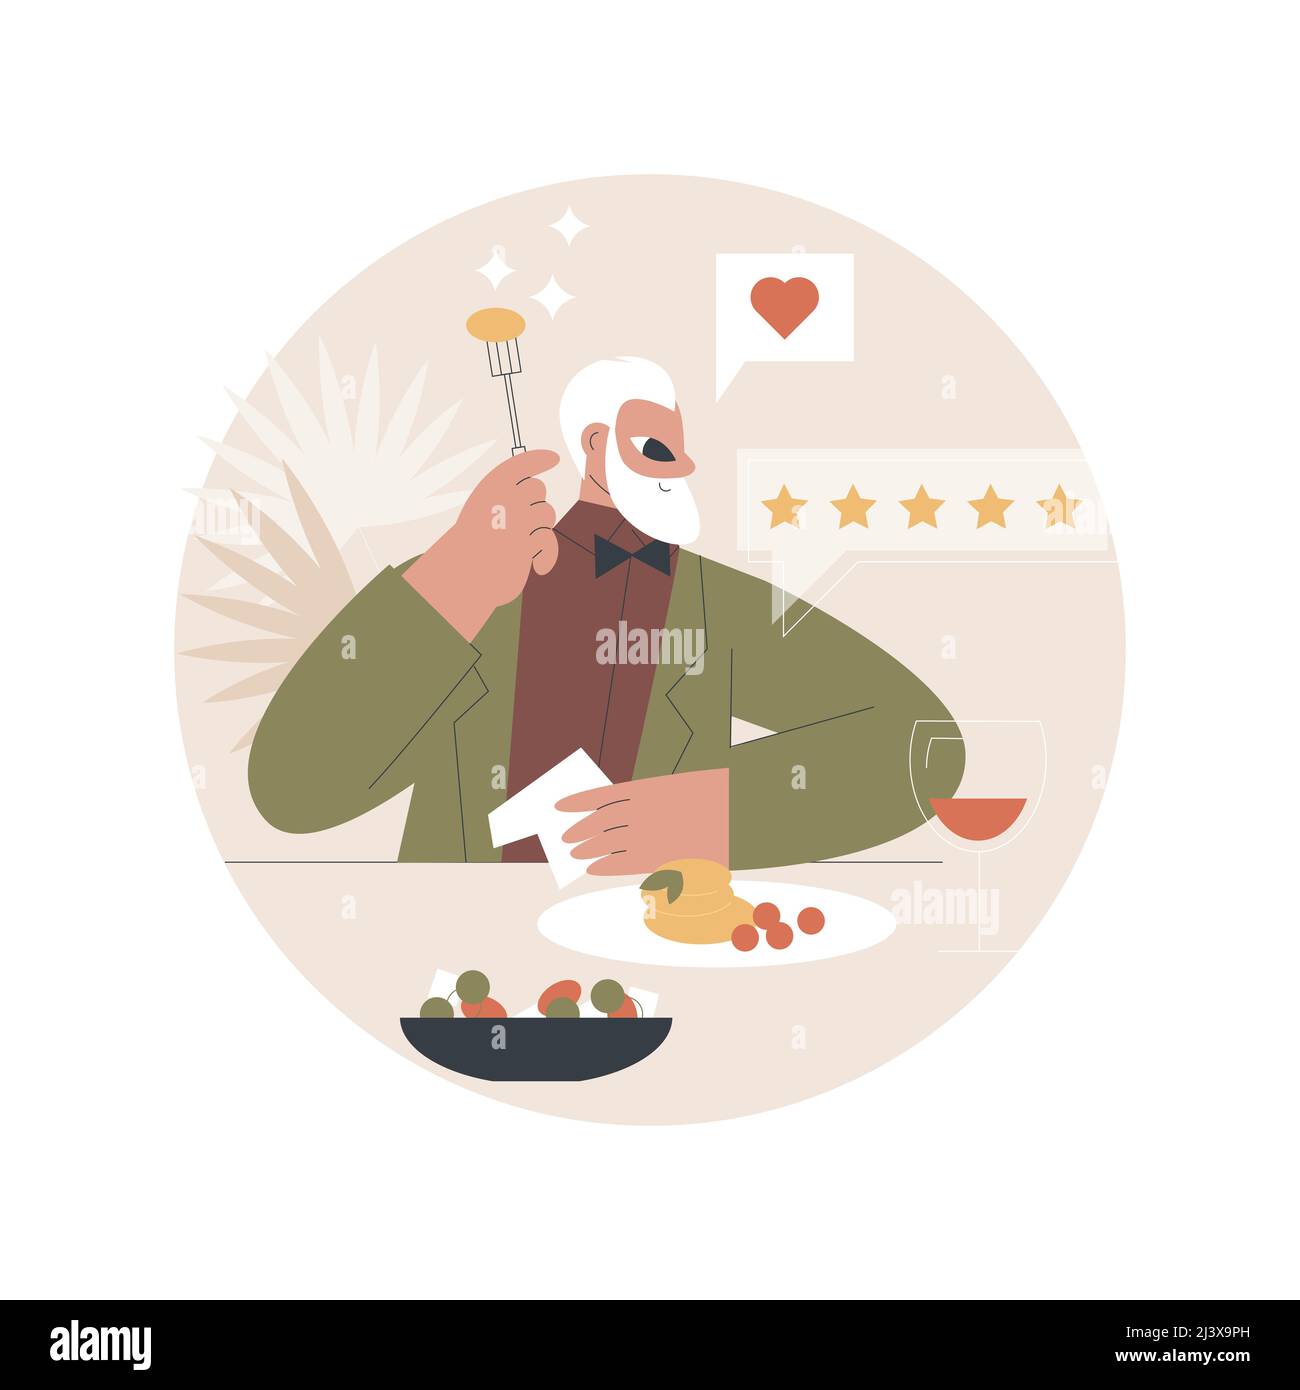 Food critic abstract concept vector illustration. Analyze food, restaurant chef, write review, rating, expert opinion, culinary show, undercover guest Stock Vector